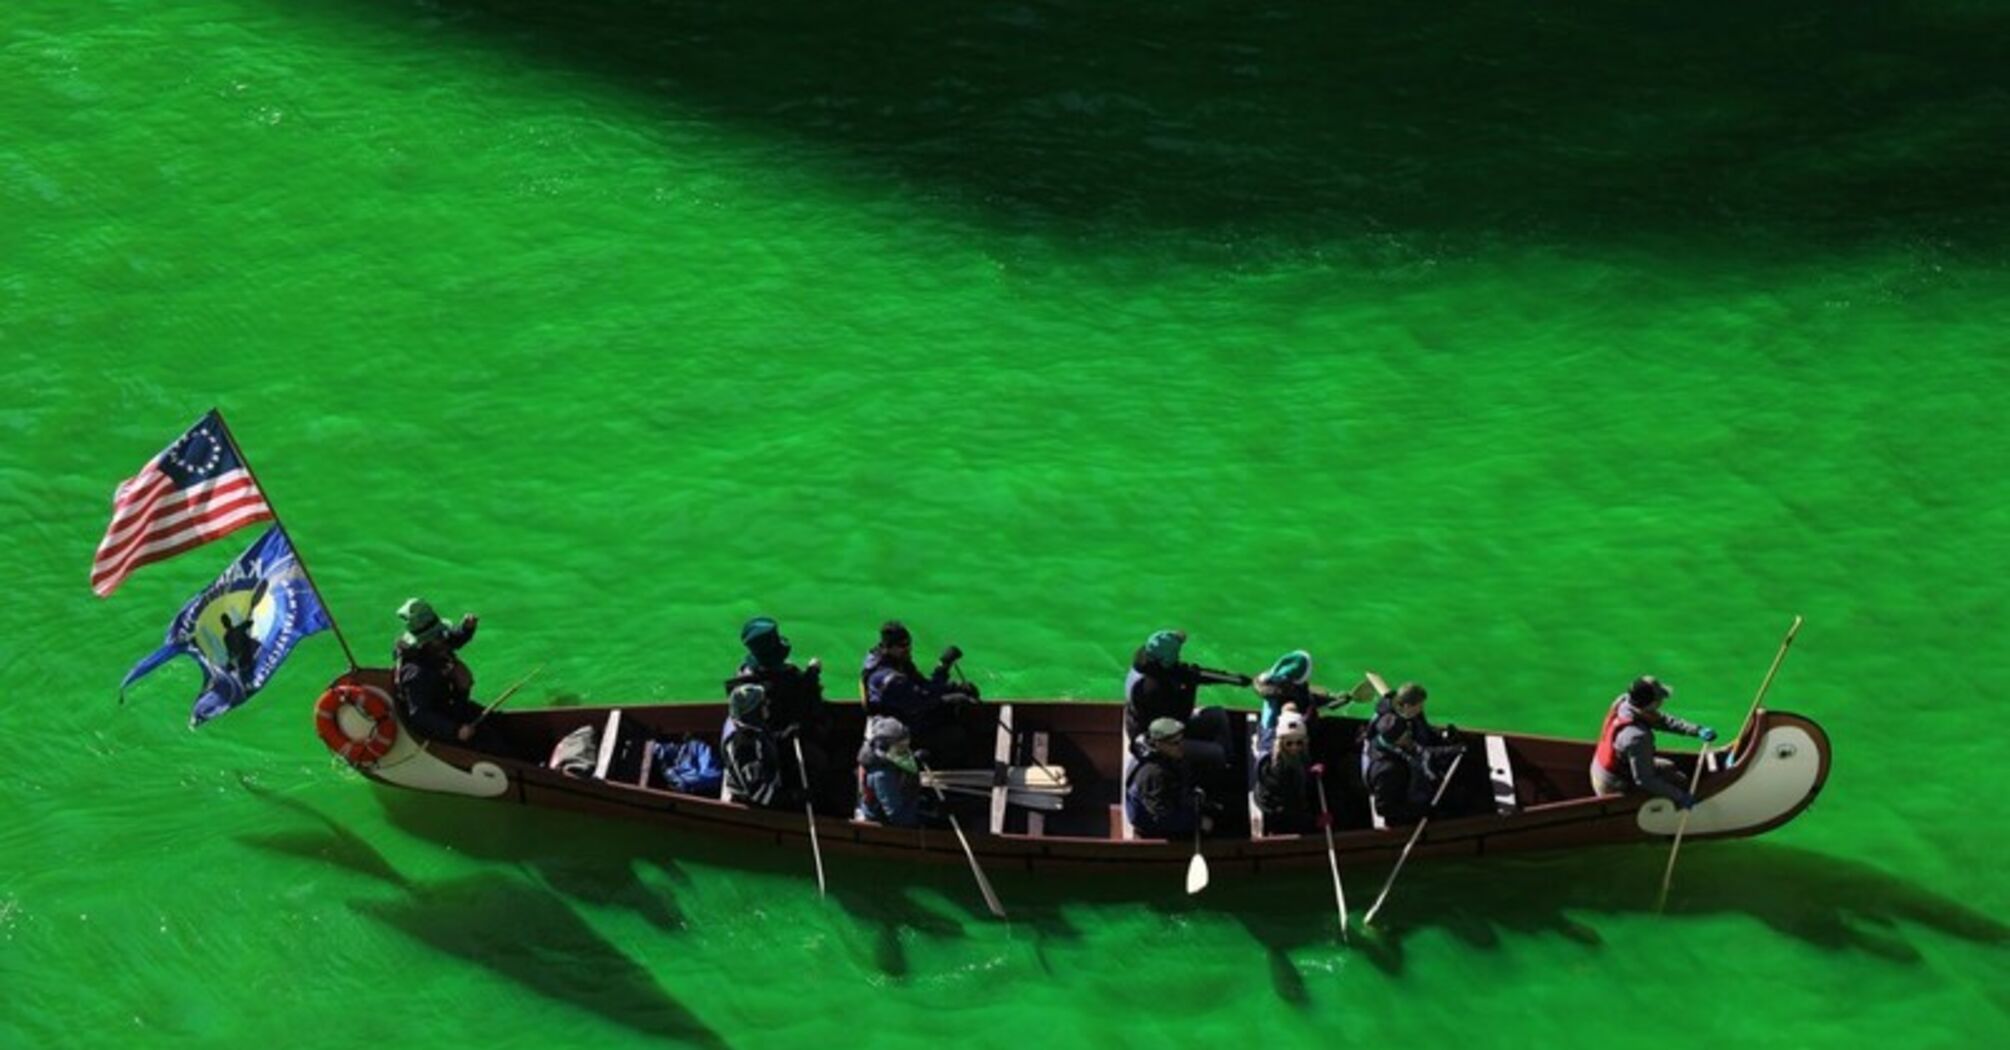 The river in Chicago painted green